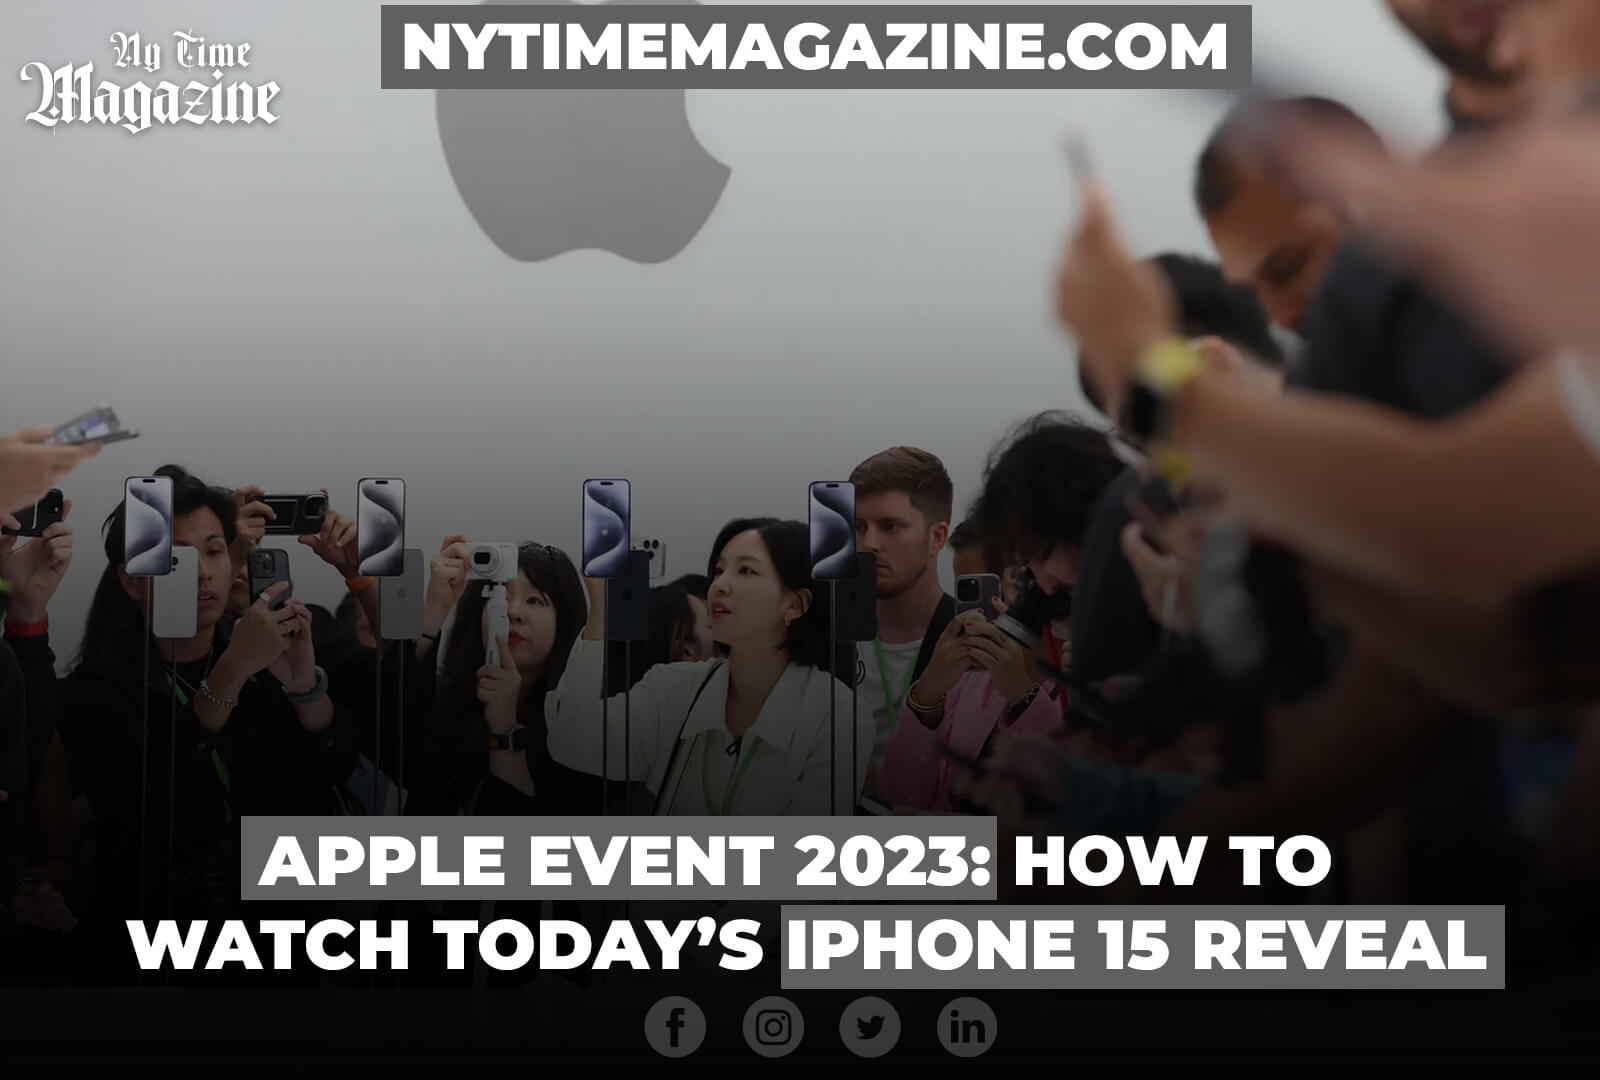 APPLE EVENT 2023: HOW TO WATCH TODAY’S IPHONE 15 REVEAL